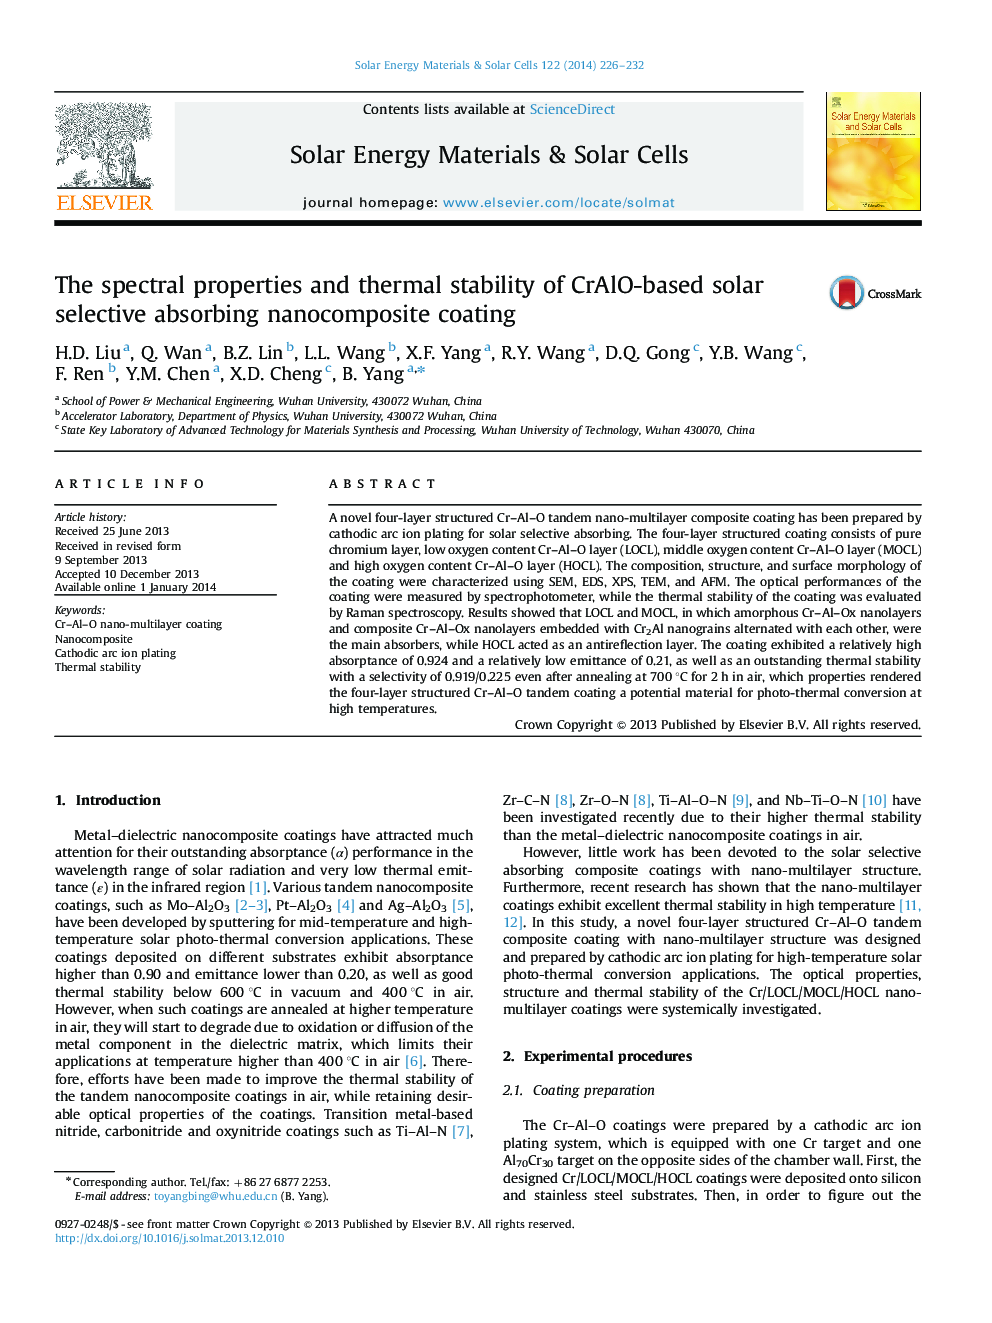 The spectral properties and thermal stability of CrAlO-based solar selective absorbing nanocomposite coating